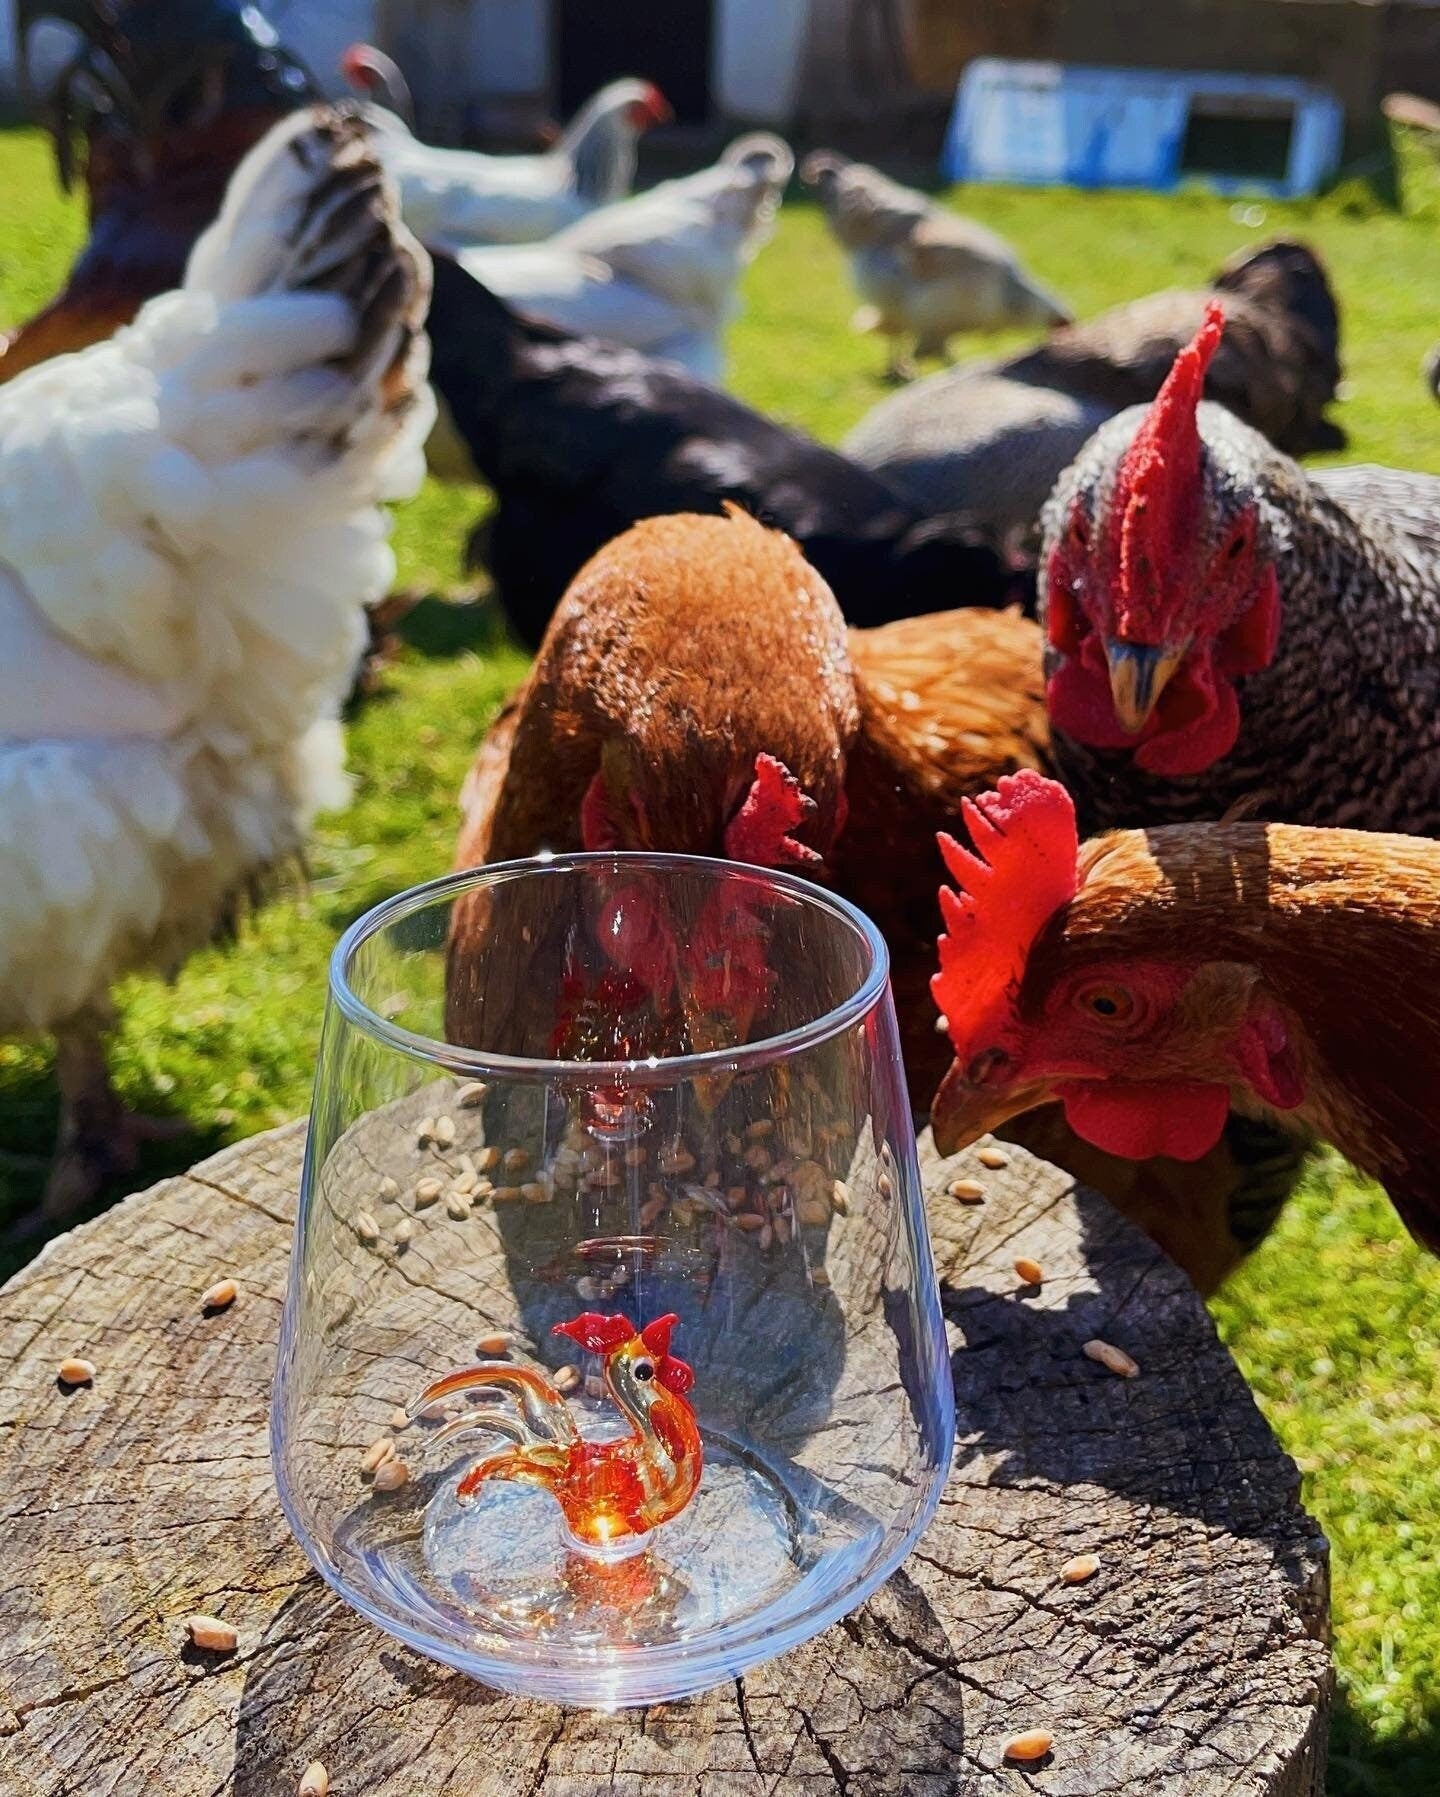 Tiny Animal Drinking Glass, Chanticleer/rooster